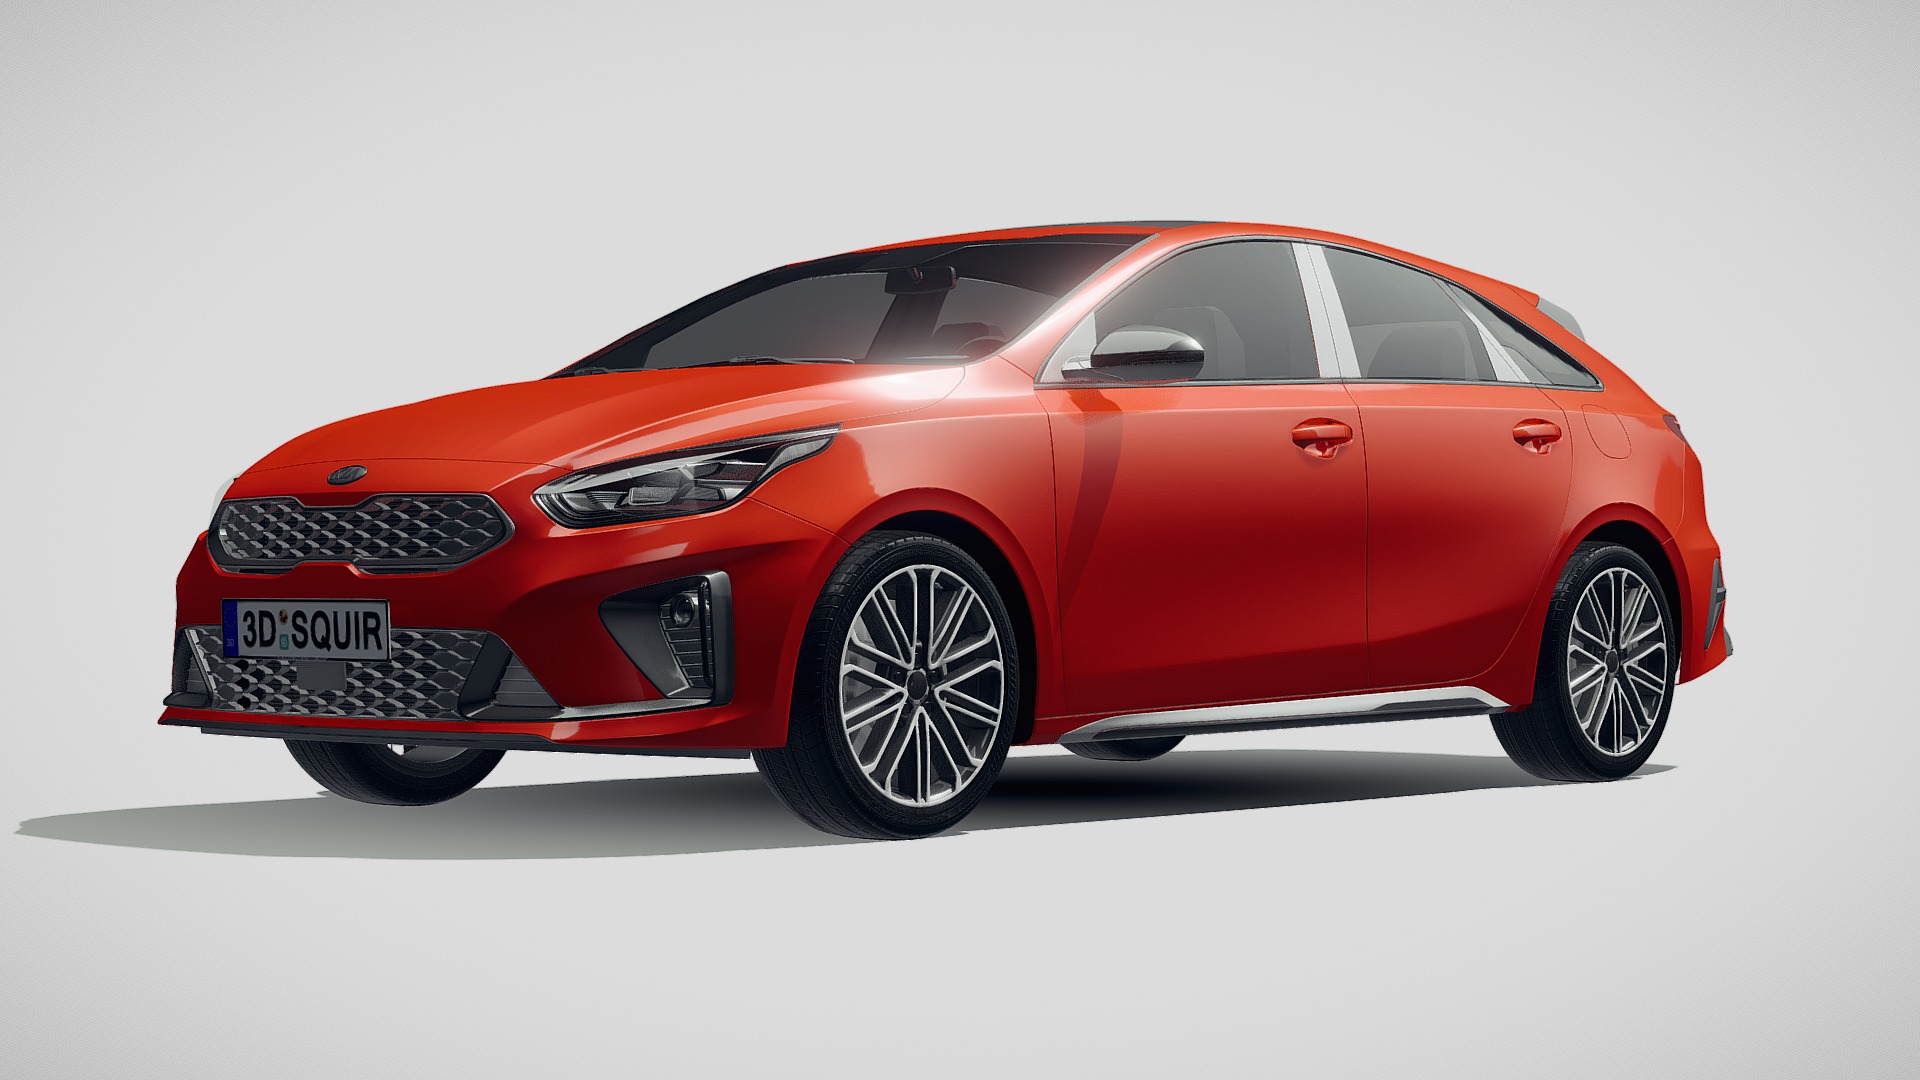 3D model Kia ProCeed 2019 - This is a 3D model of the Kia ProCeed 2019. The 3D model is about a red car with a white background.